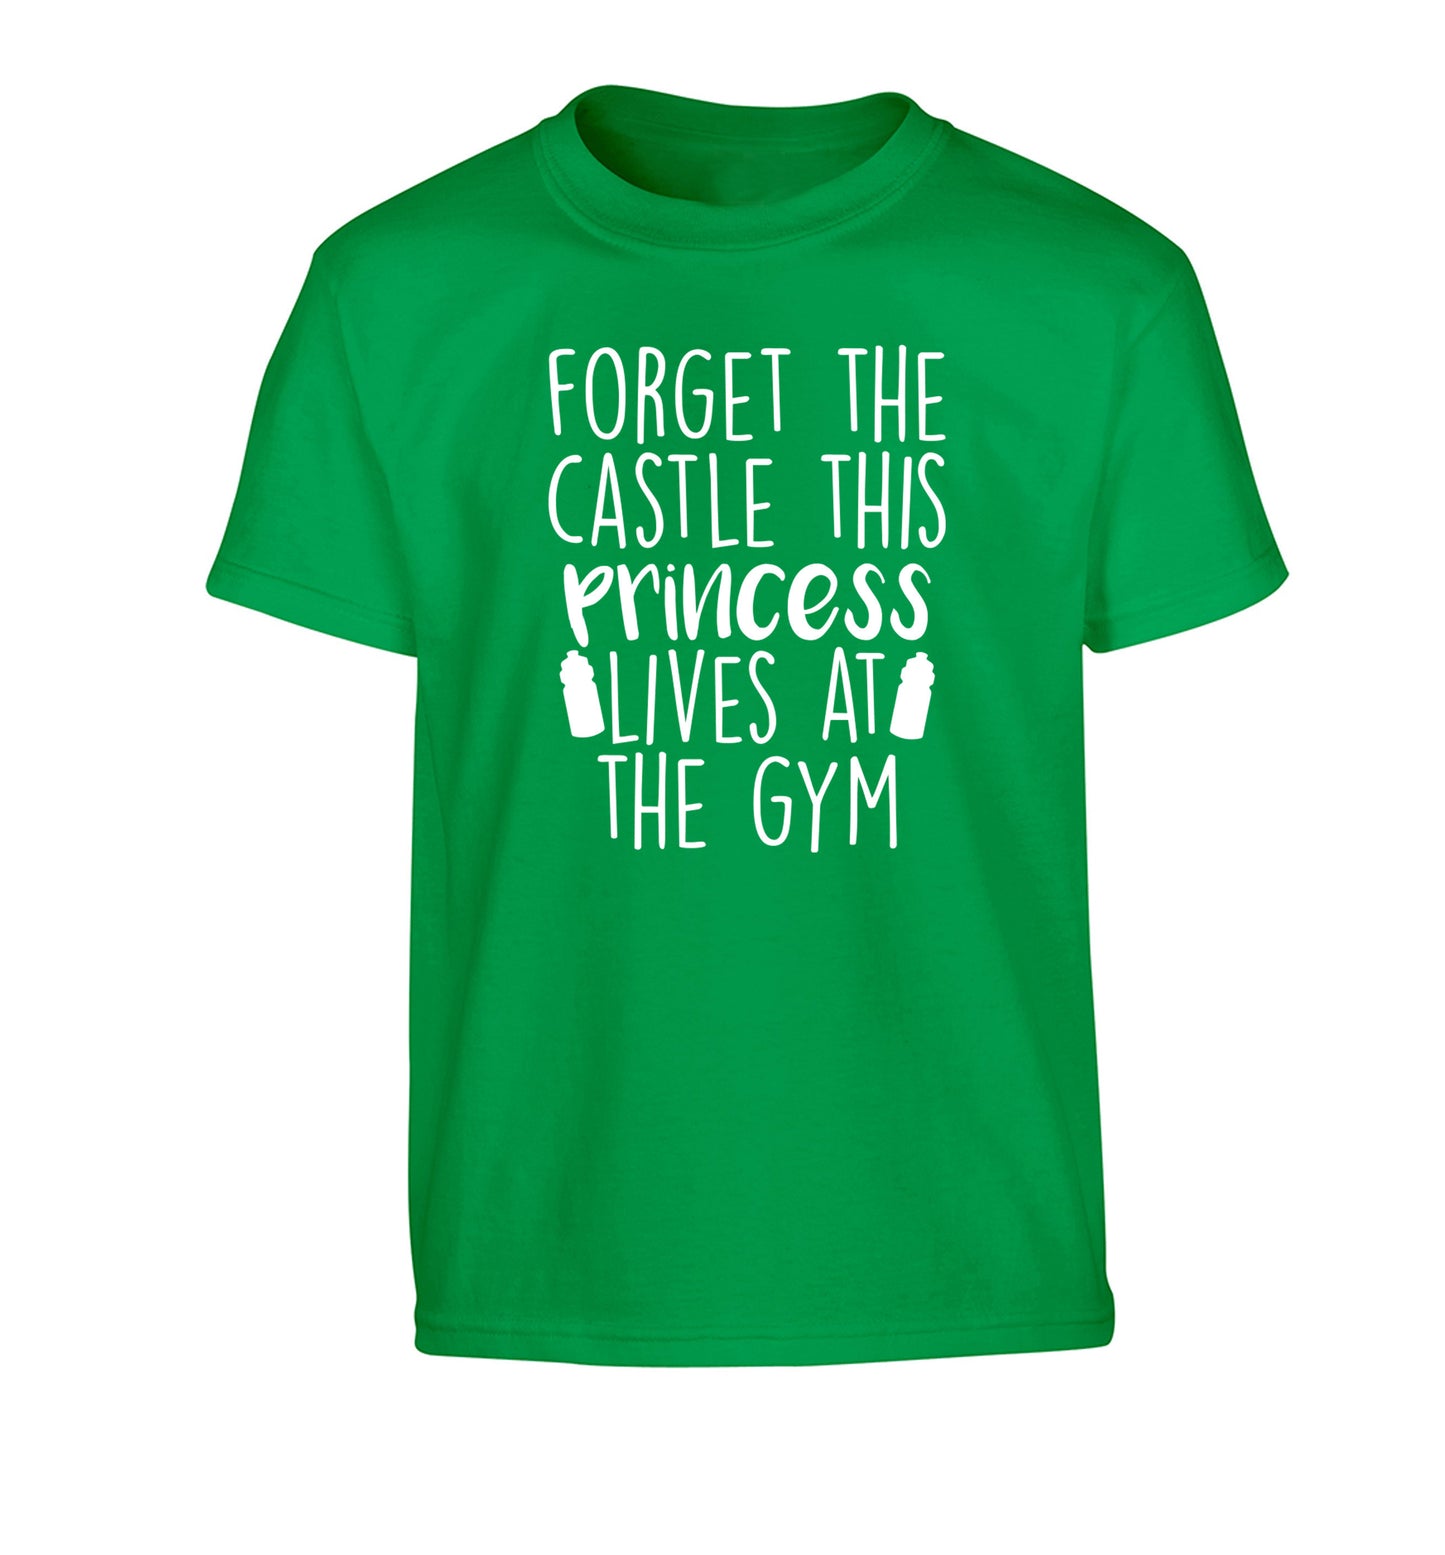 Forget the castle this princess lives at the gym Children's green Tshirt 12-14 Years